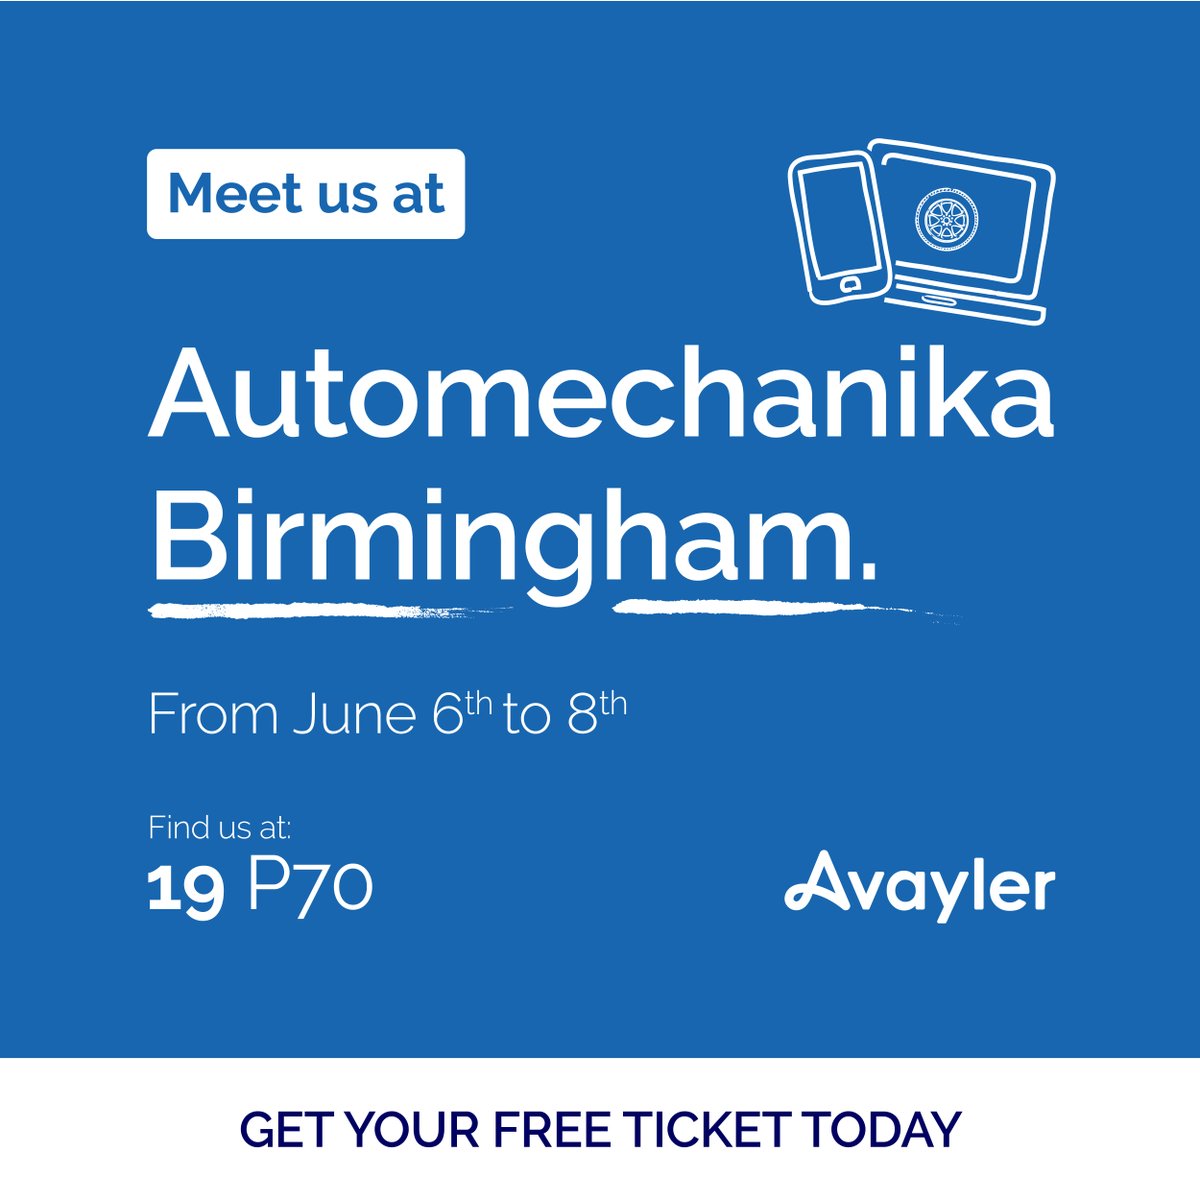 🚗 Next week Avayler will be at #automechanikauk, showing our automotive, industry built shop & mobile van management software. Come to Hall19 P70 to see how you can transform your automotive services. Get your free ticket now! hubs.la/Q01S5h5l0 #automotivesoftware 💻